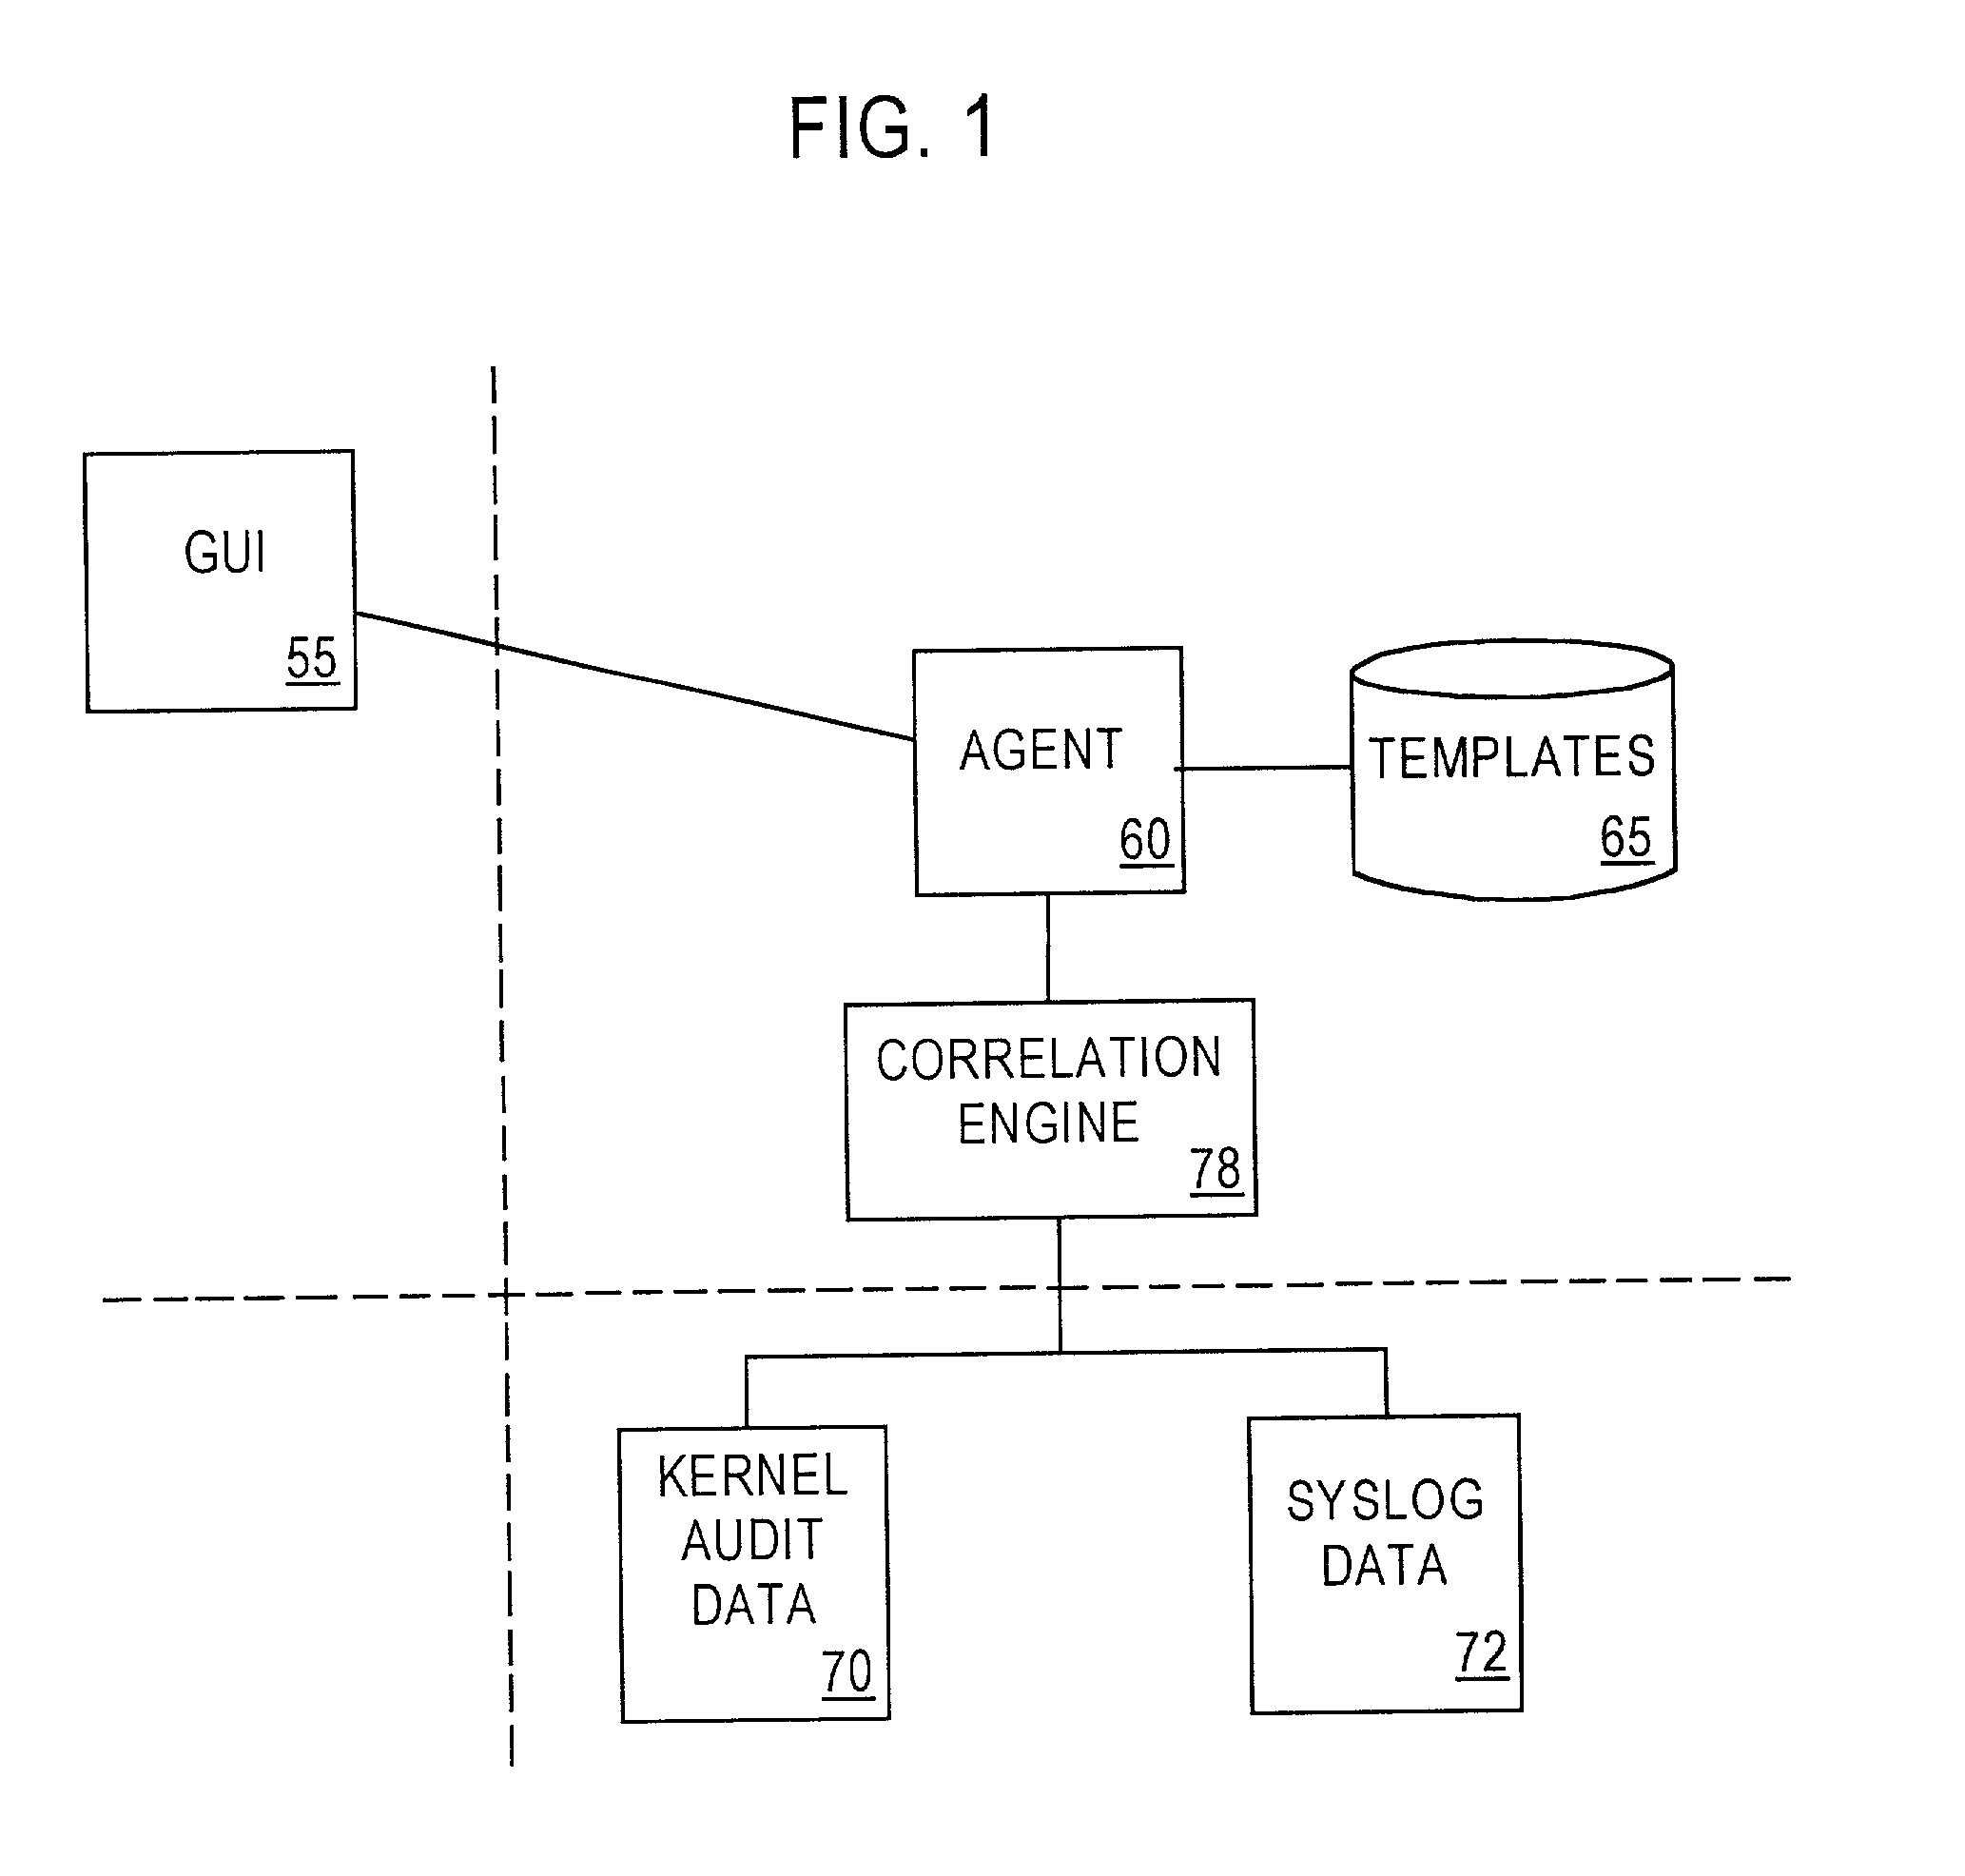 Computer architecture for an intrusion detection system